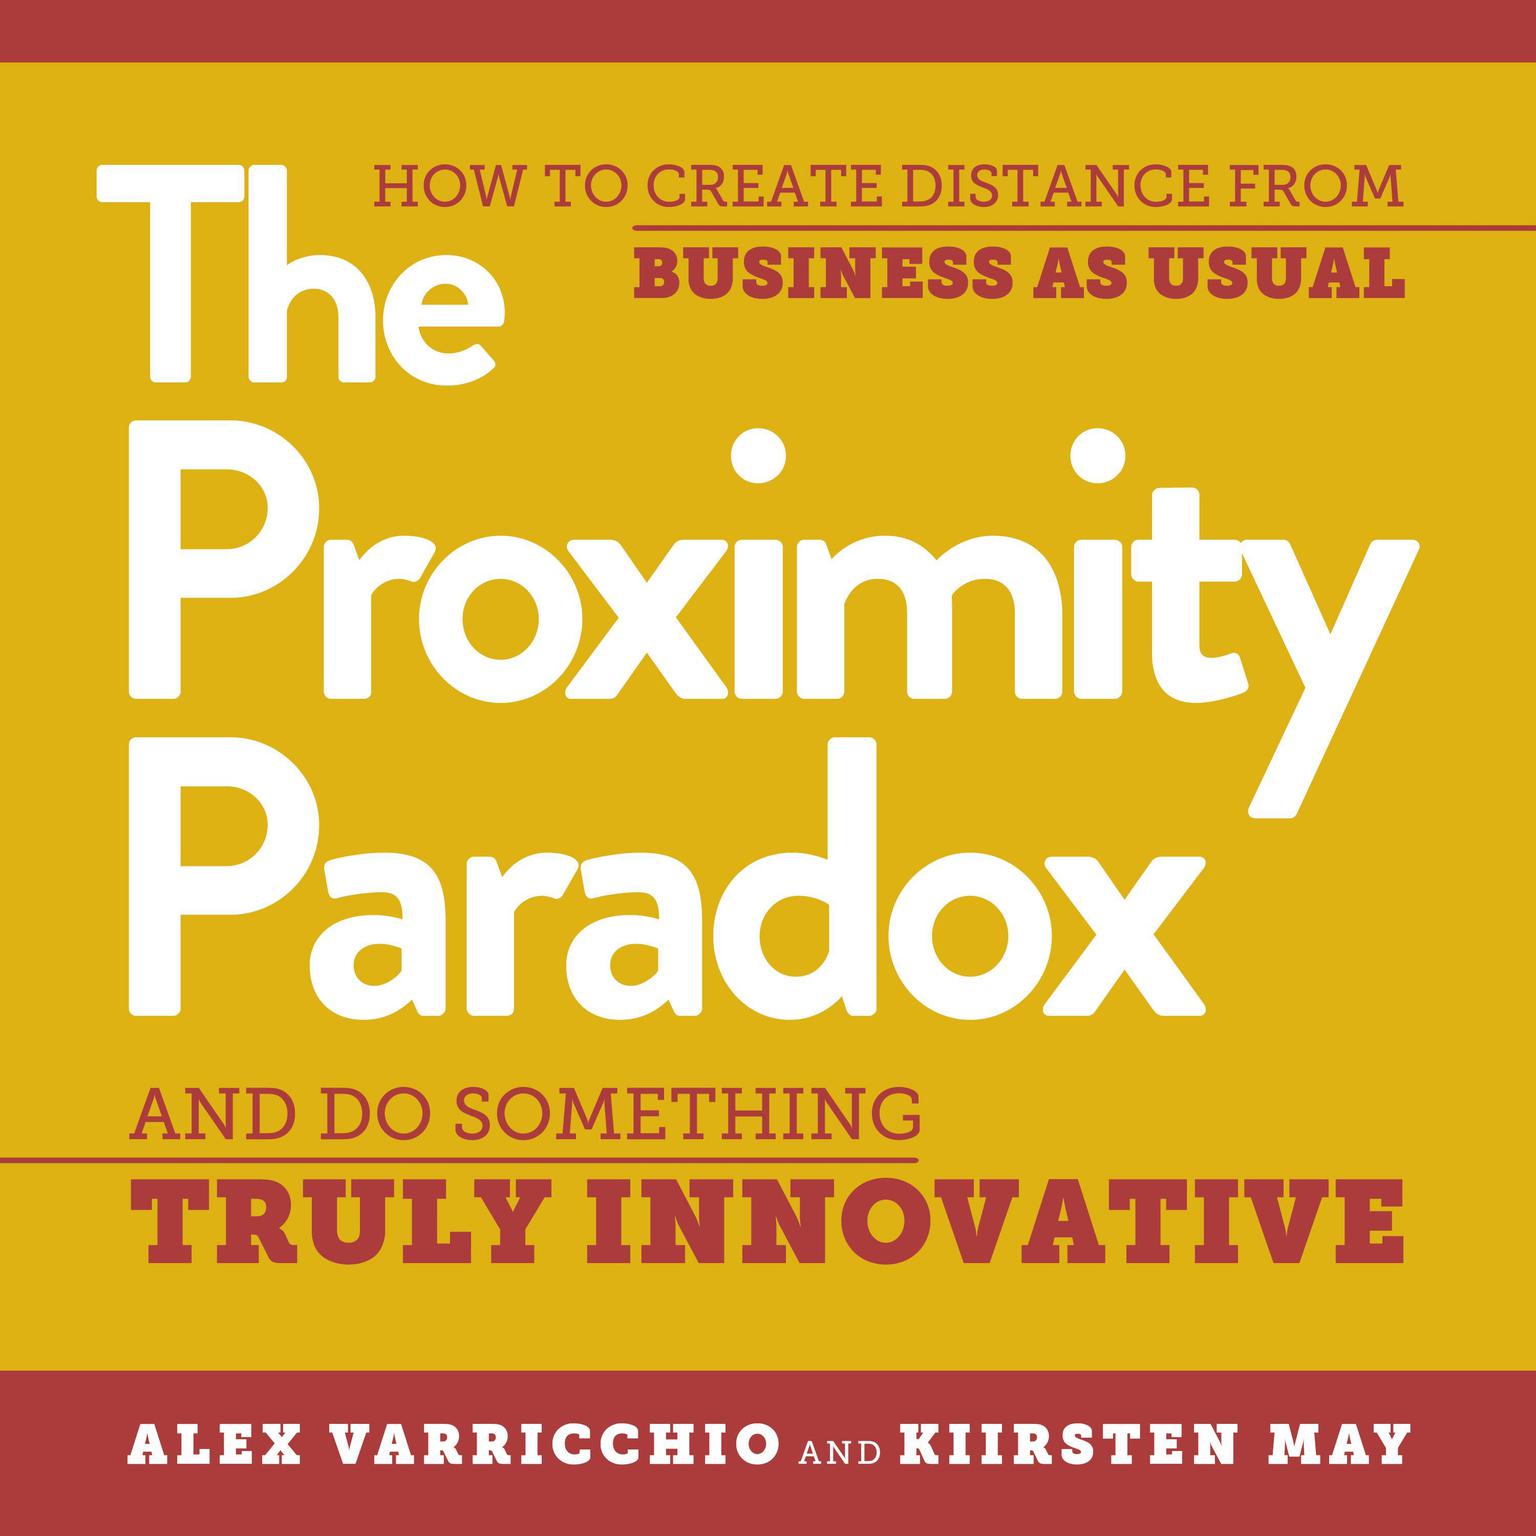 The Proximity Paradox: How to Create Distance from Business as Usual and Do Something Truly Innovative Audiobook, by Alex Varricchio